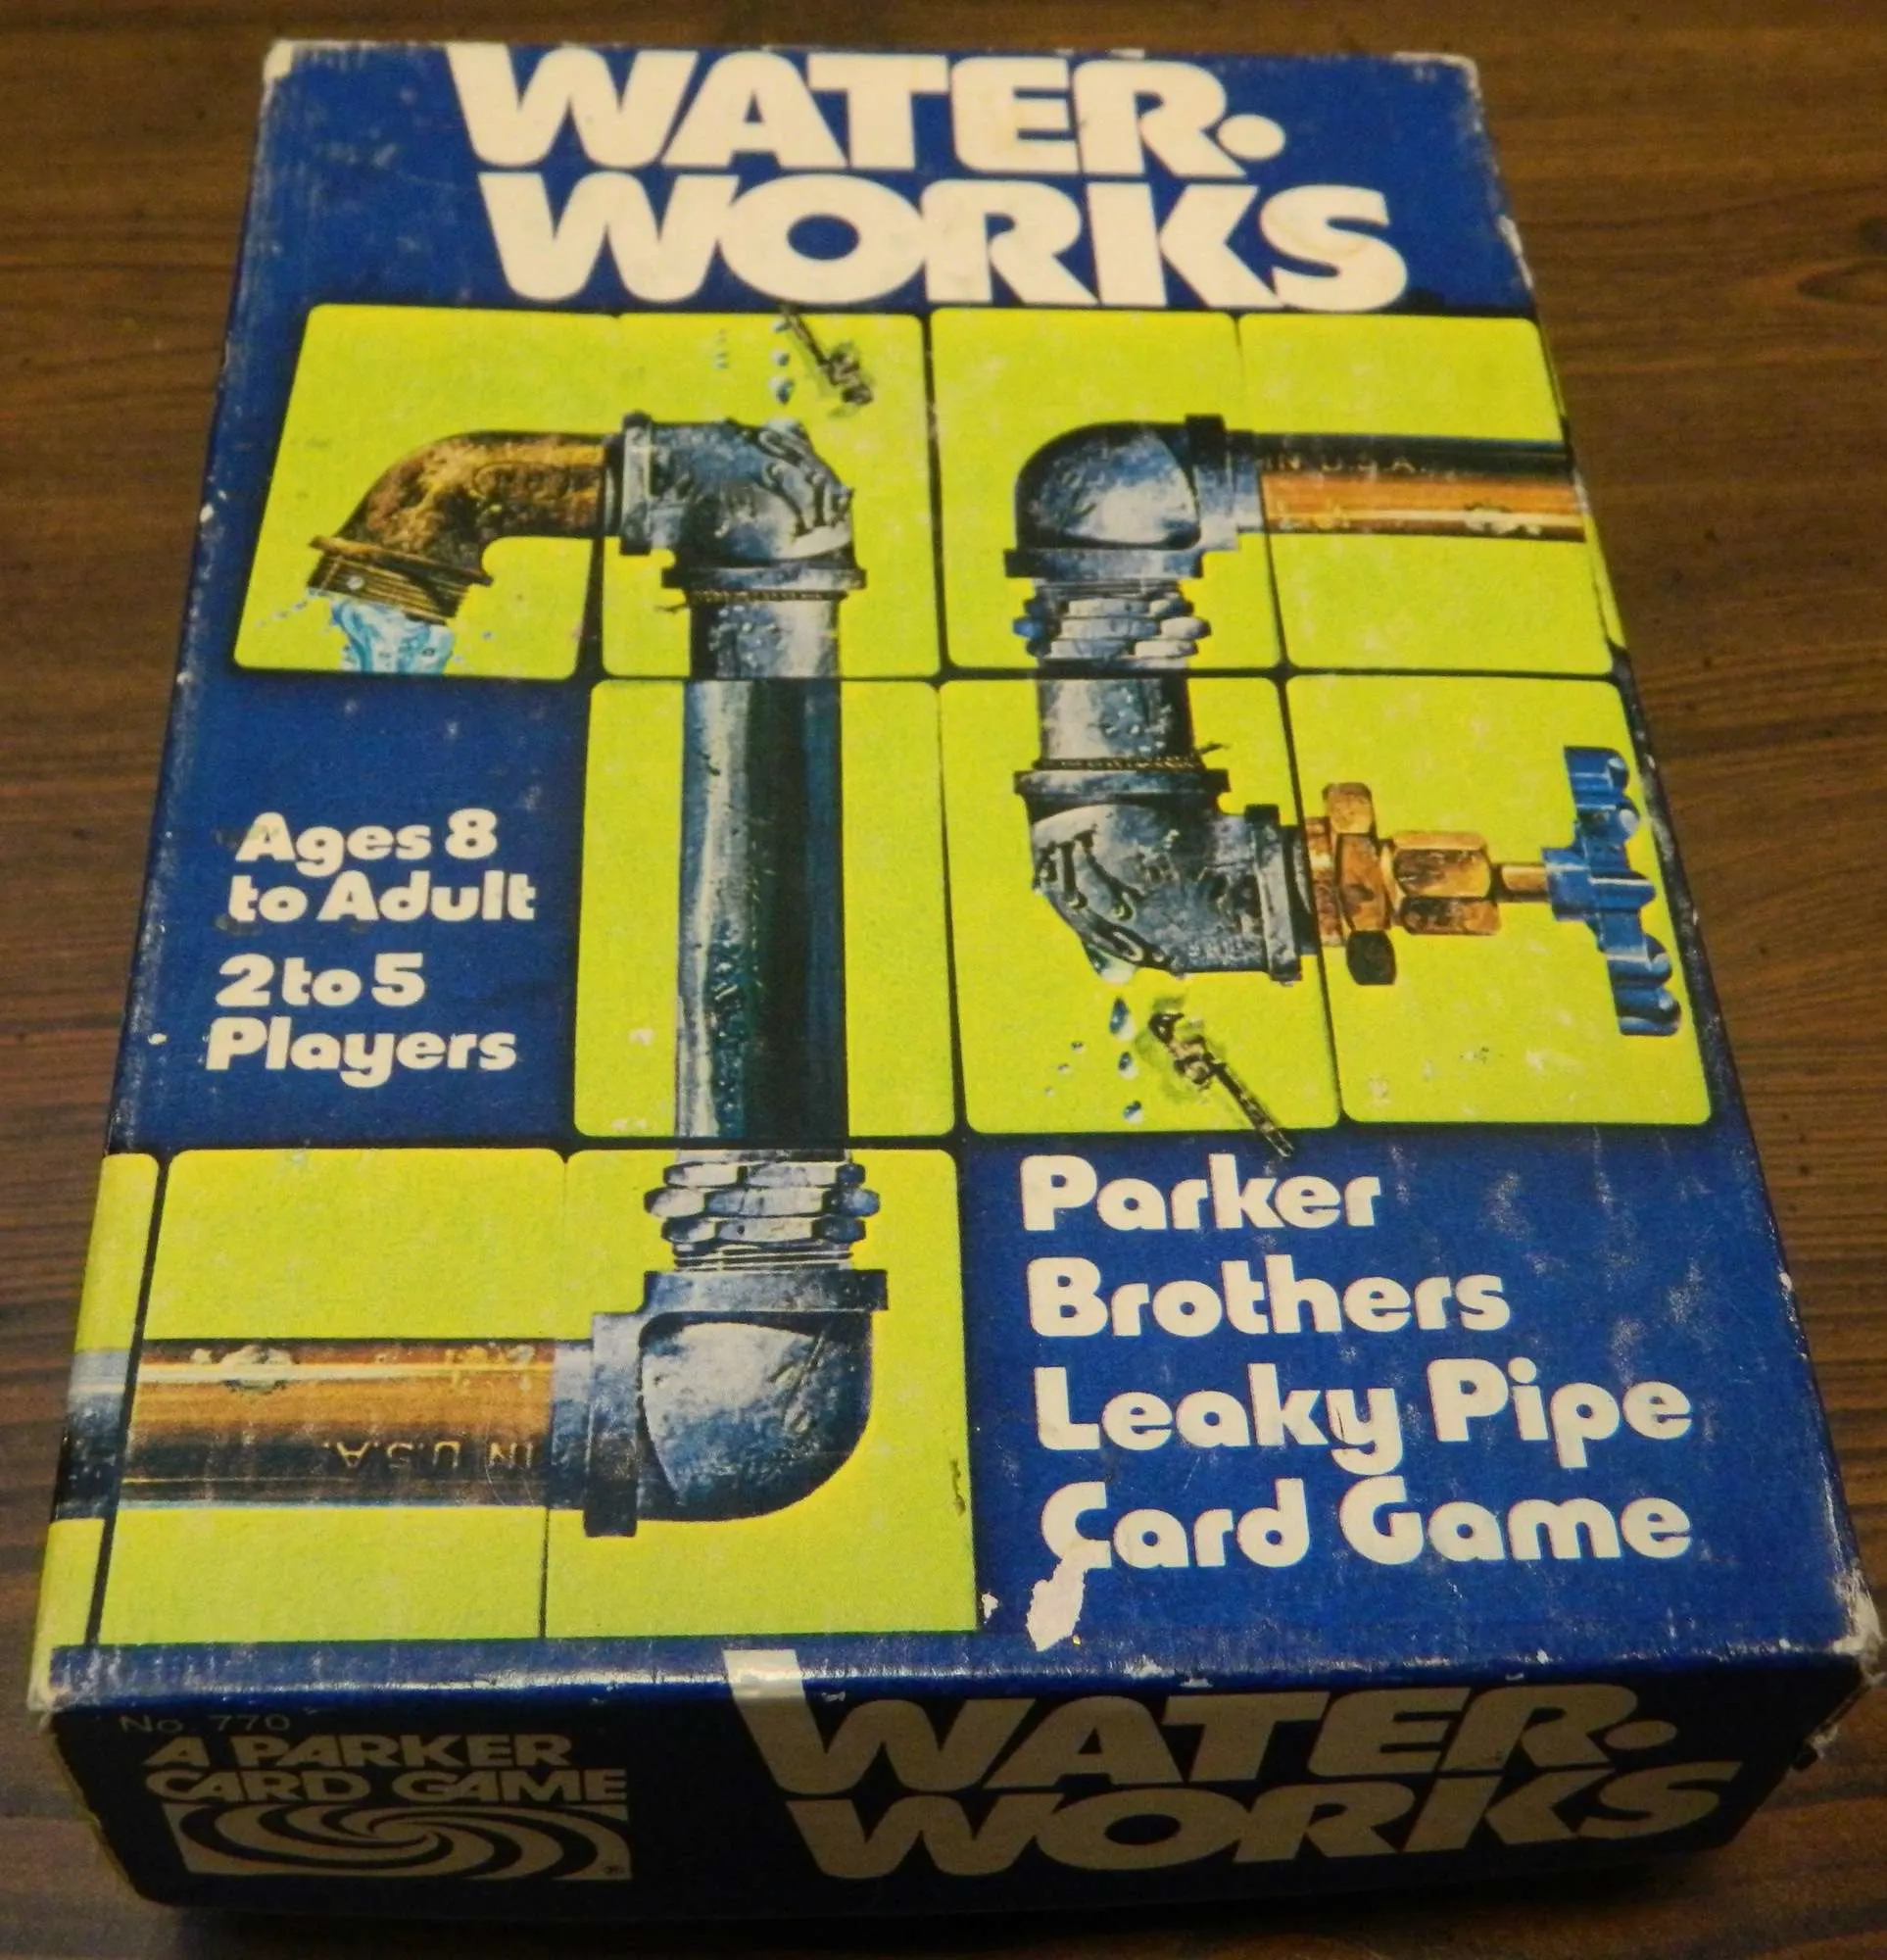 Box for Waterworks